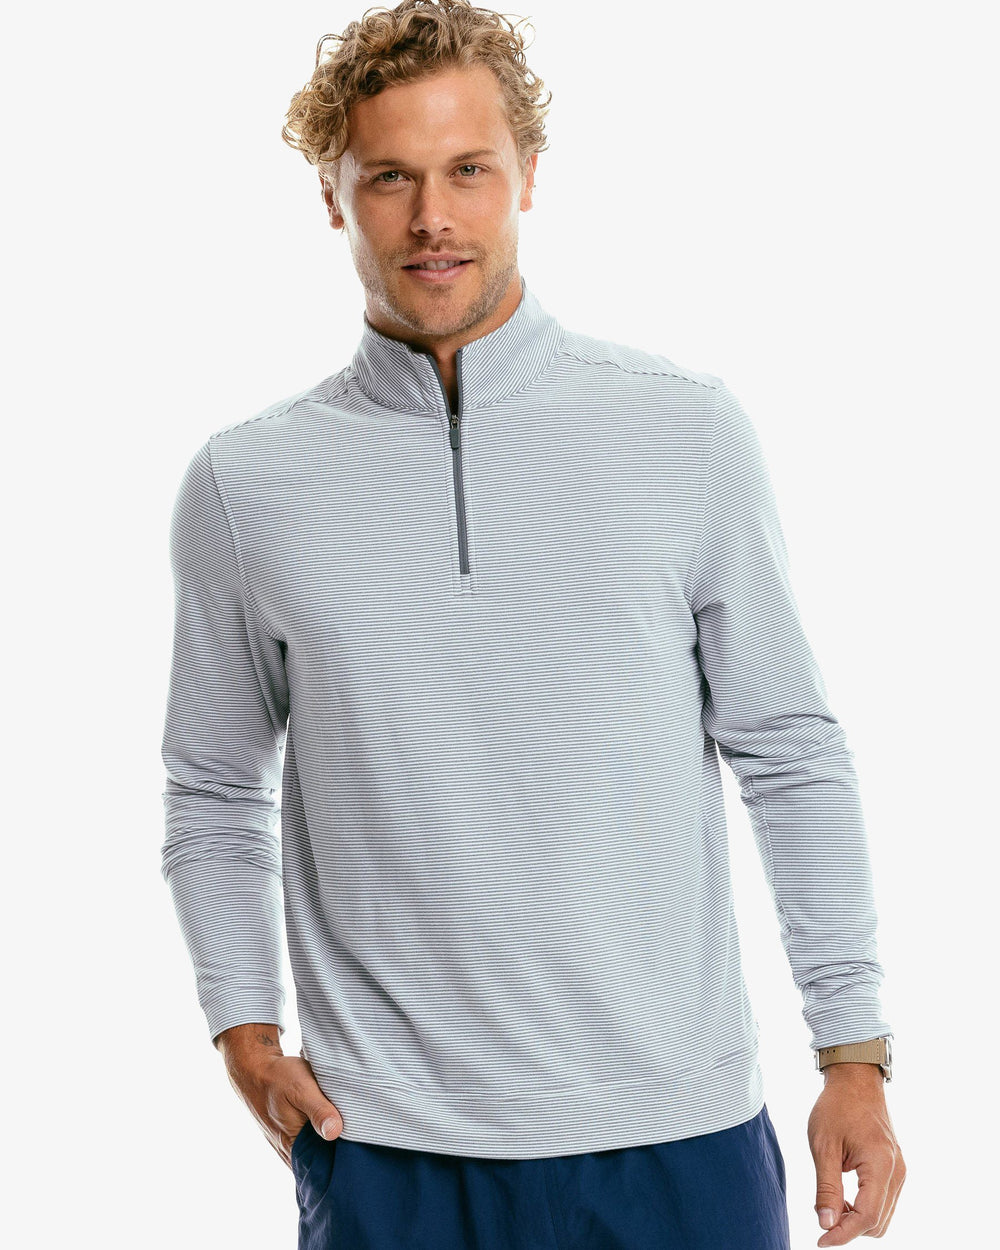 The front of the Men's Cruiser Heather Micro Striped Performance Quarter Zip Pullover by Southern Tide - Heather Steel Grey